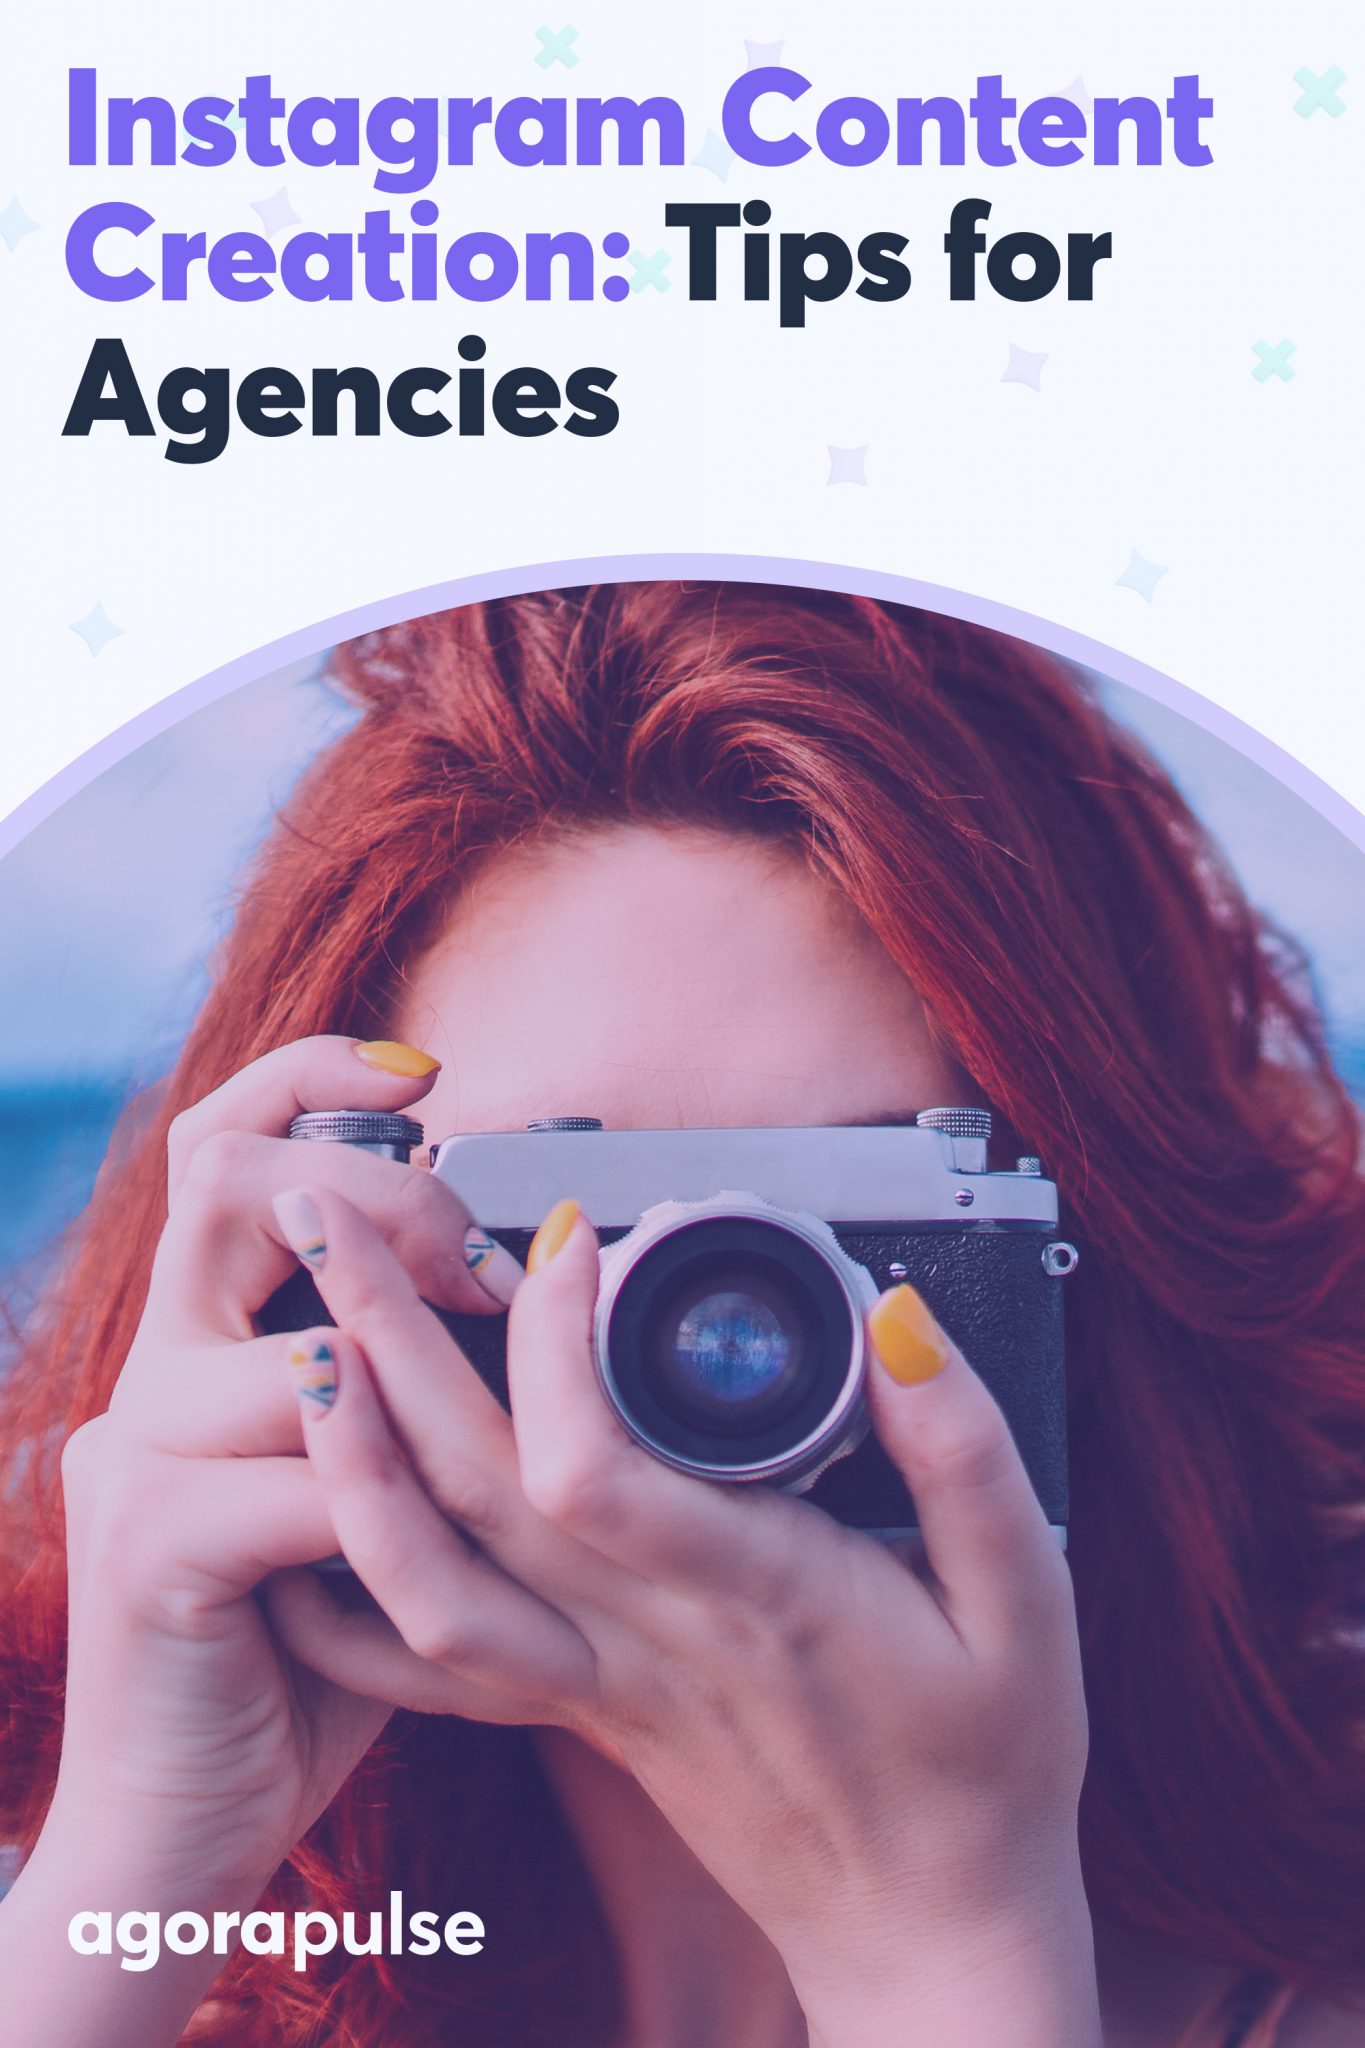 Instagram Content Creation: Tips for Agencies